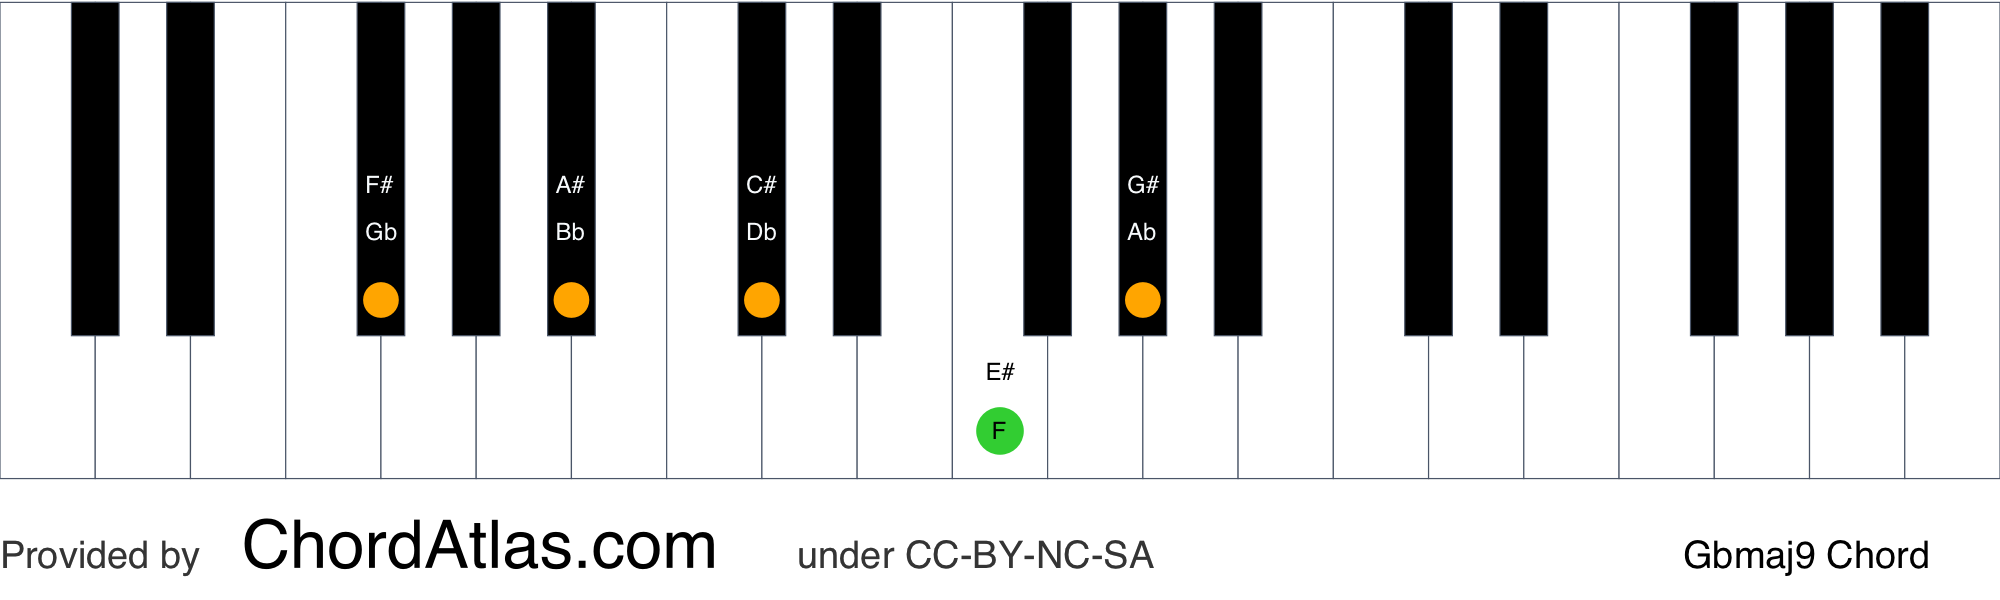 g flat major piano scale